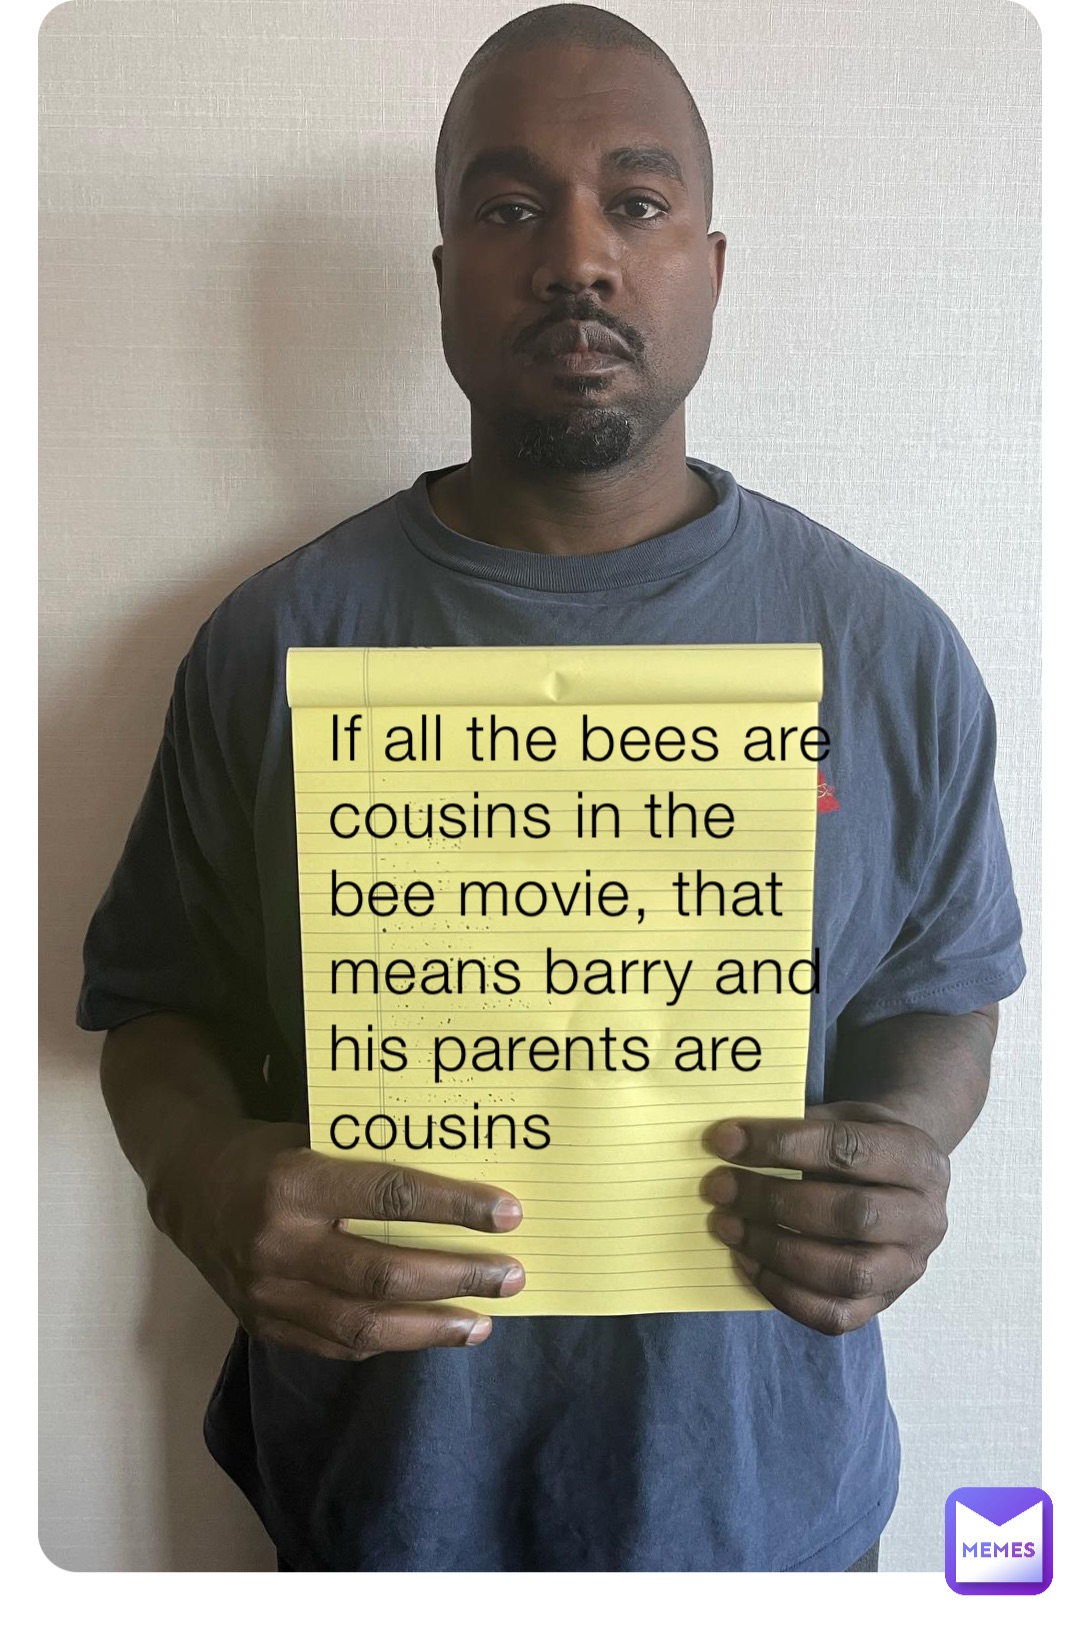 If all the bees are cousins in the bee movie, that means barry and his parents are cousins